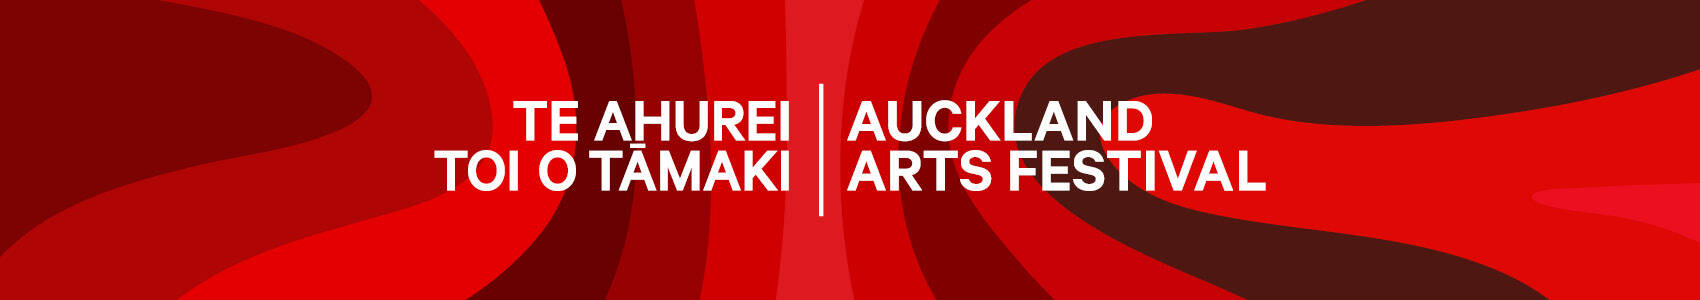 Appointment of new Artistic Director for Te Ahurei Toi o Tāmaki Auckland Arts Festival